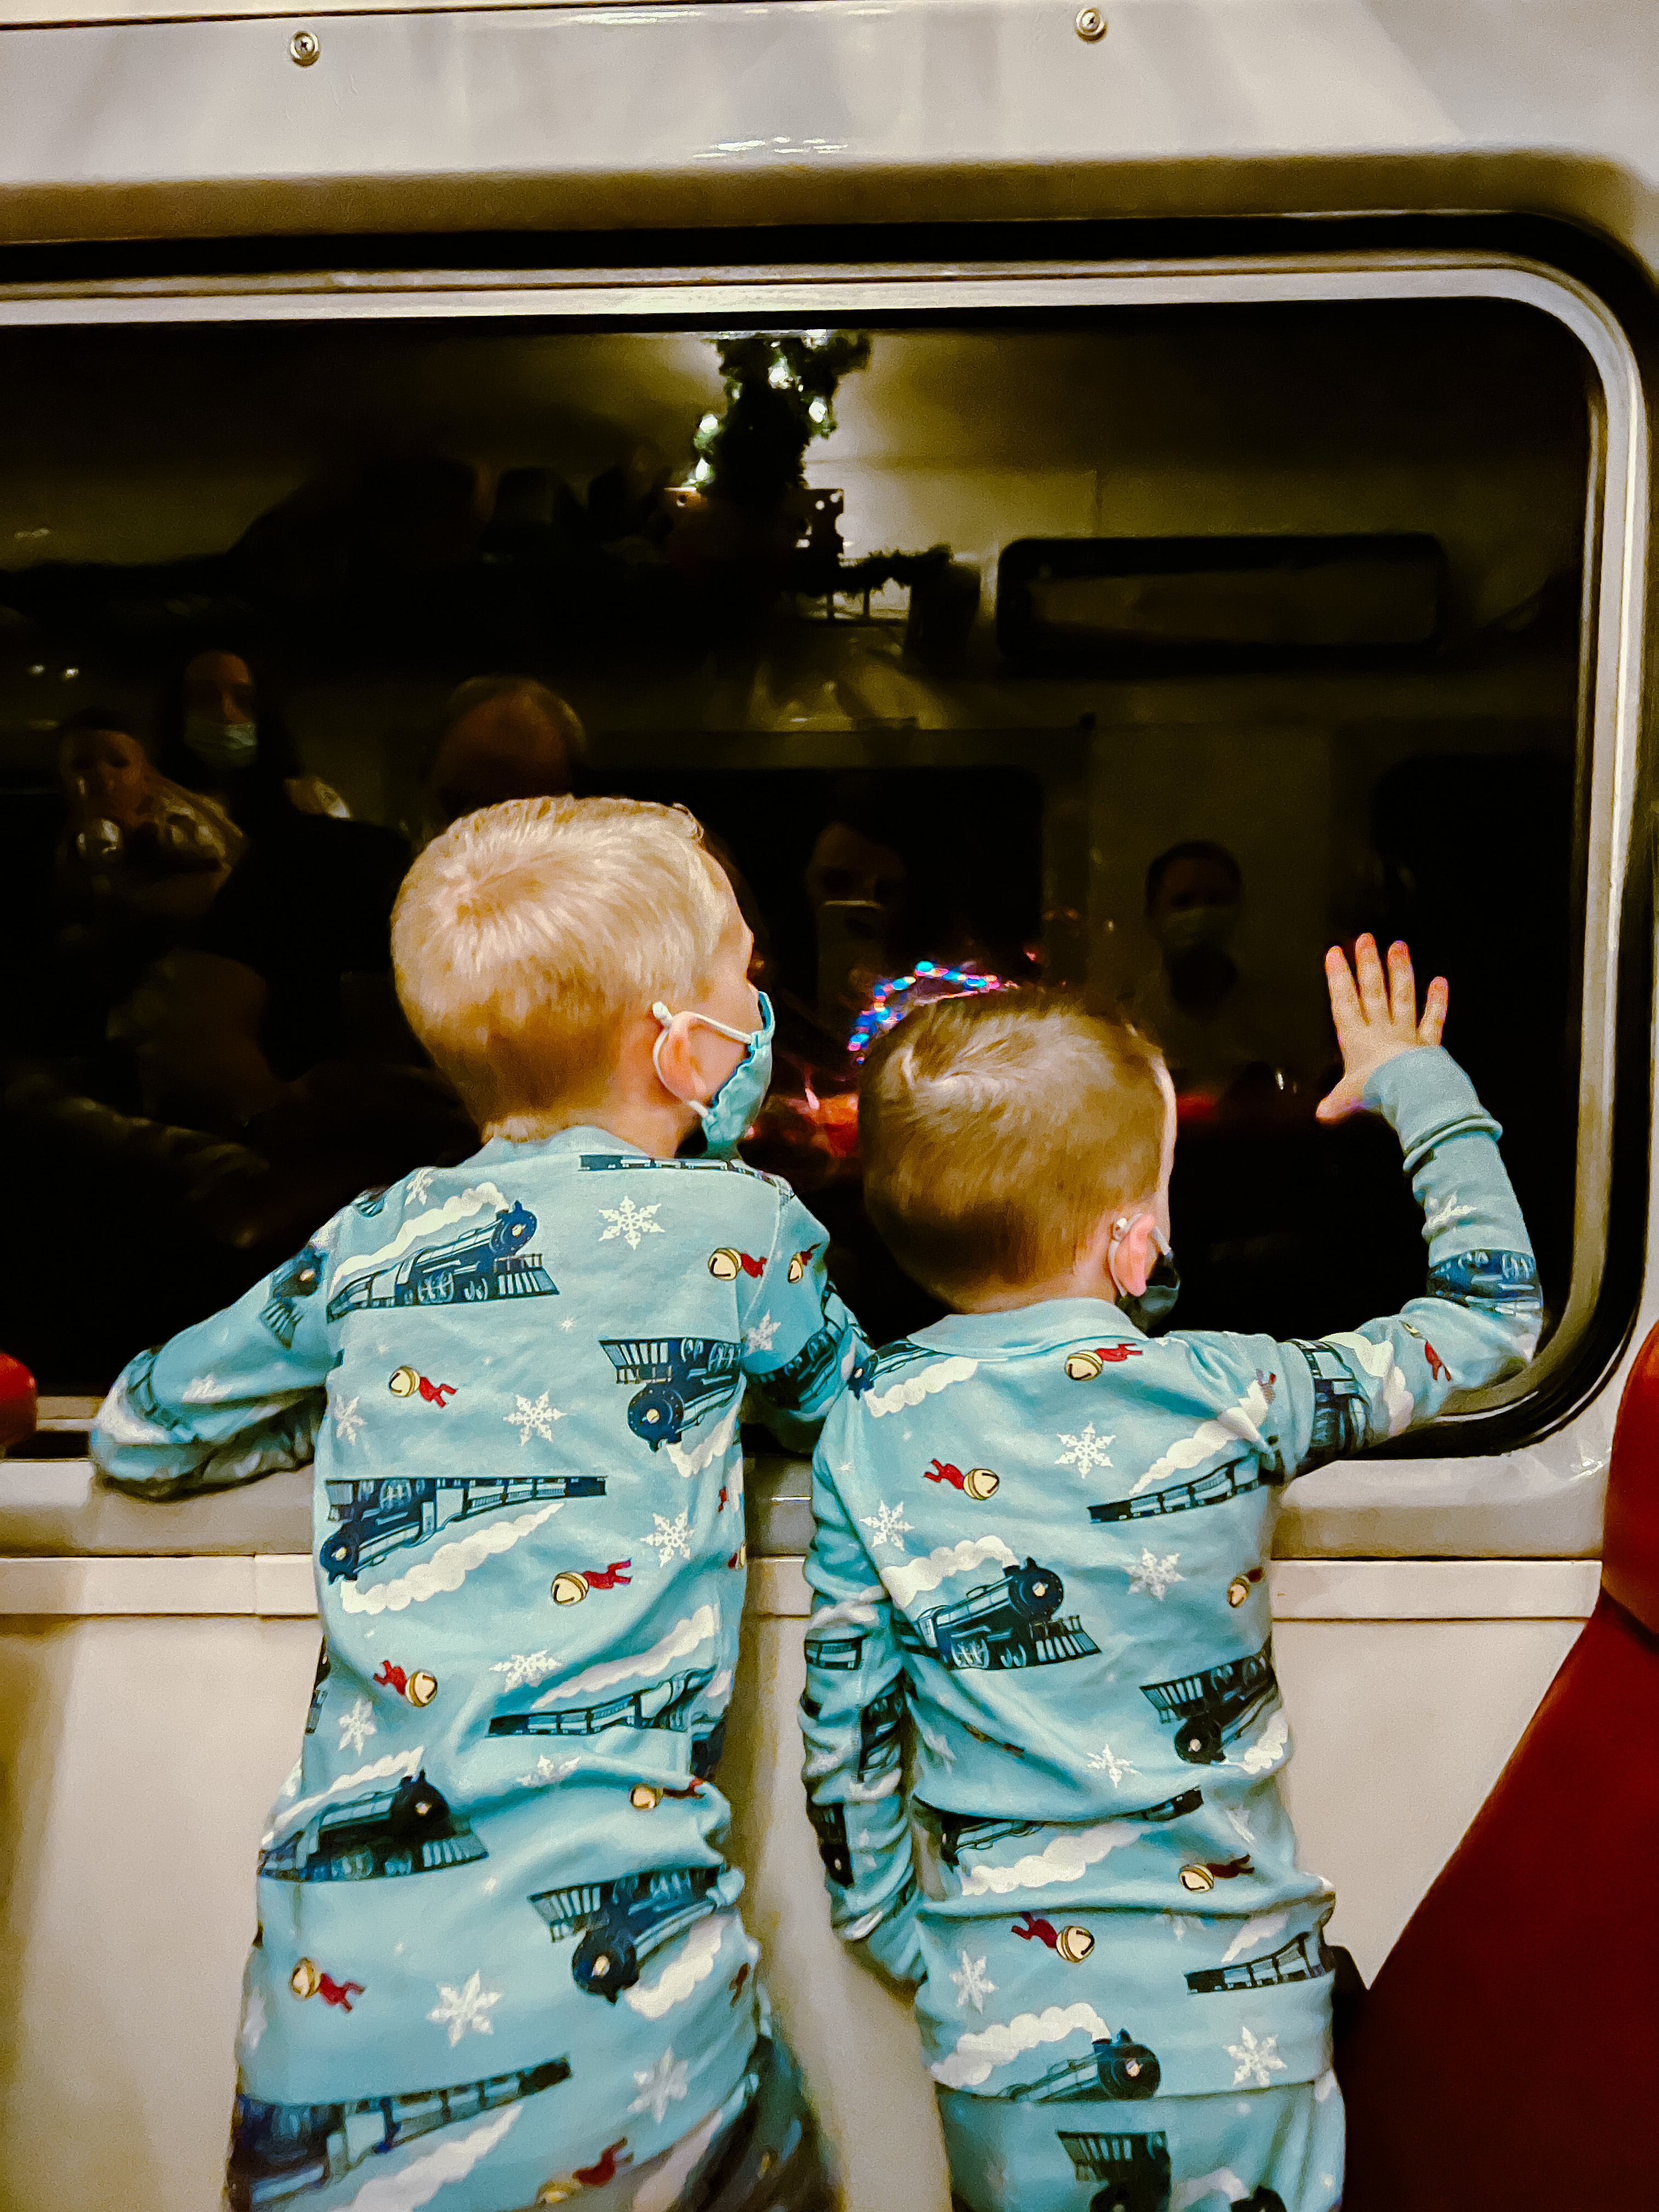 Polar Express Pajamas Roundup and Review - Friday We're In Love